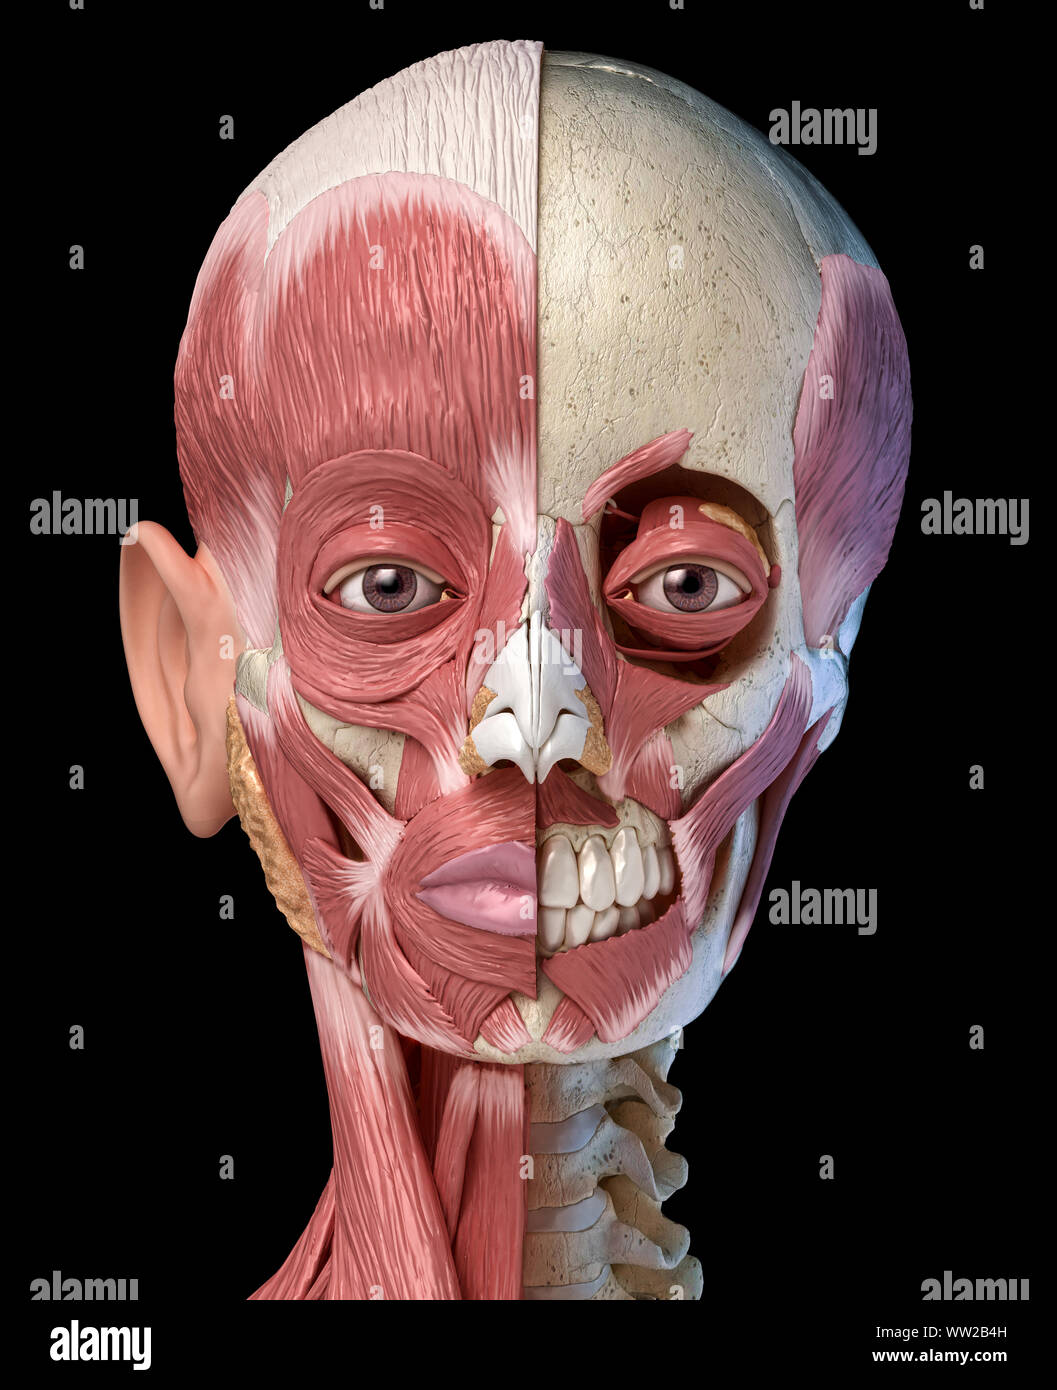 Partial Side View Stock Photos & Partial Side View Stock Images - Alamy